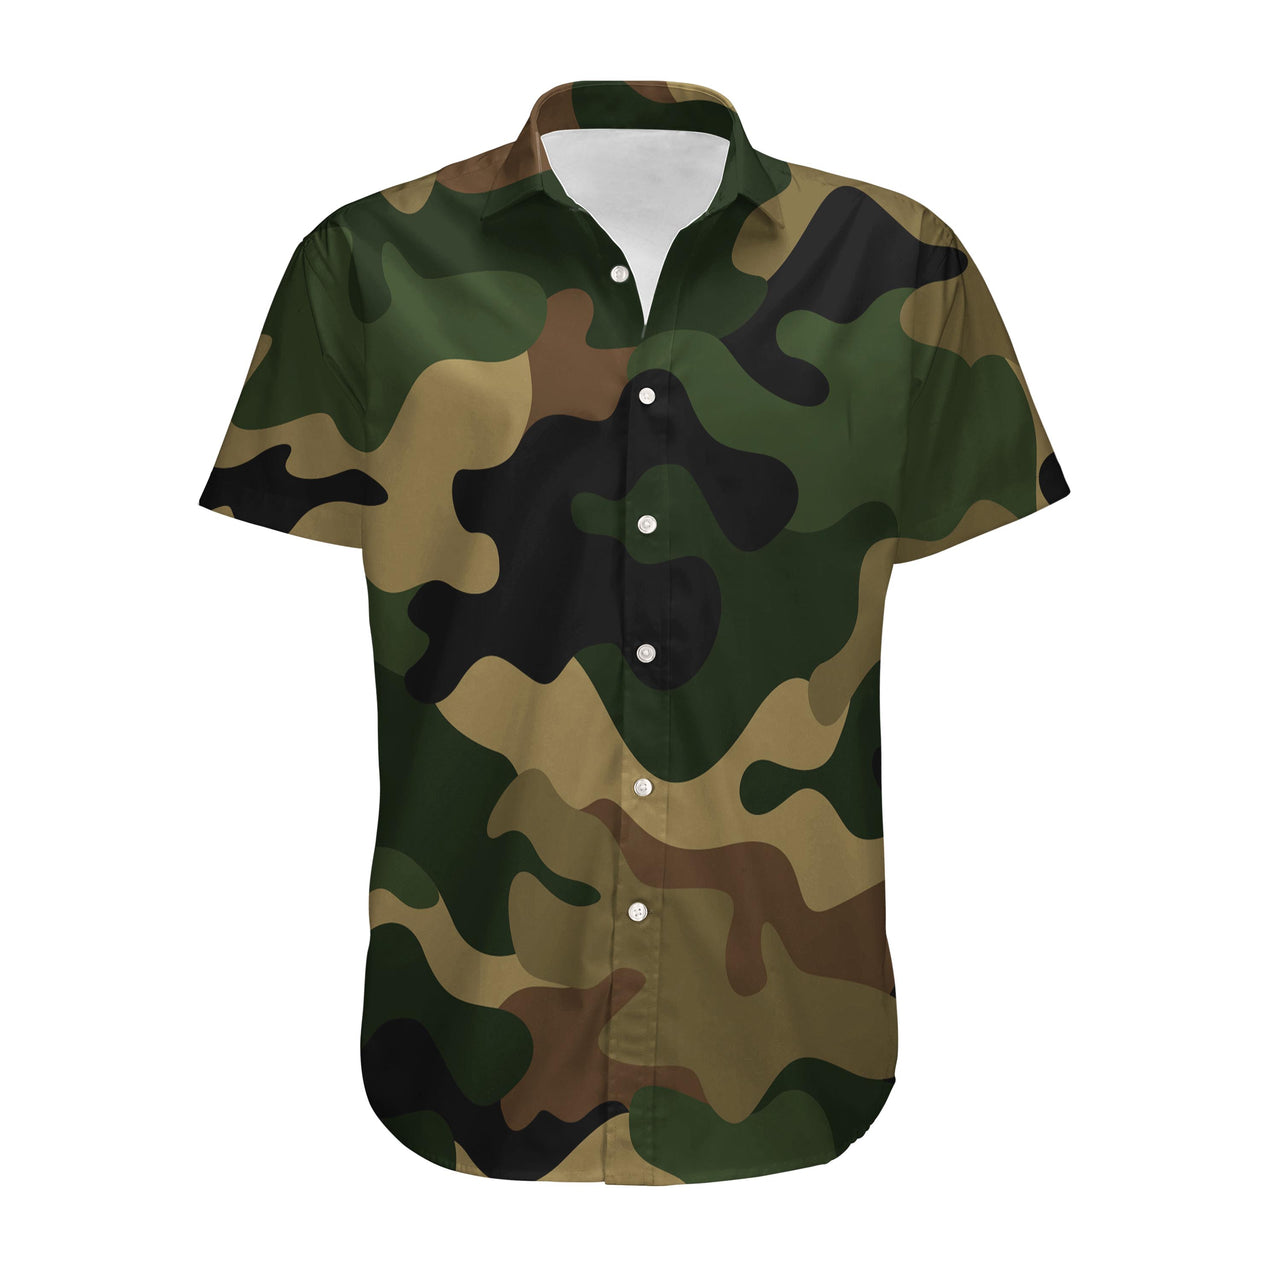 Military Camouflage Army Green Designed 3D Shirts